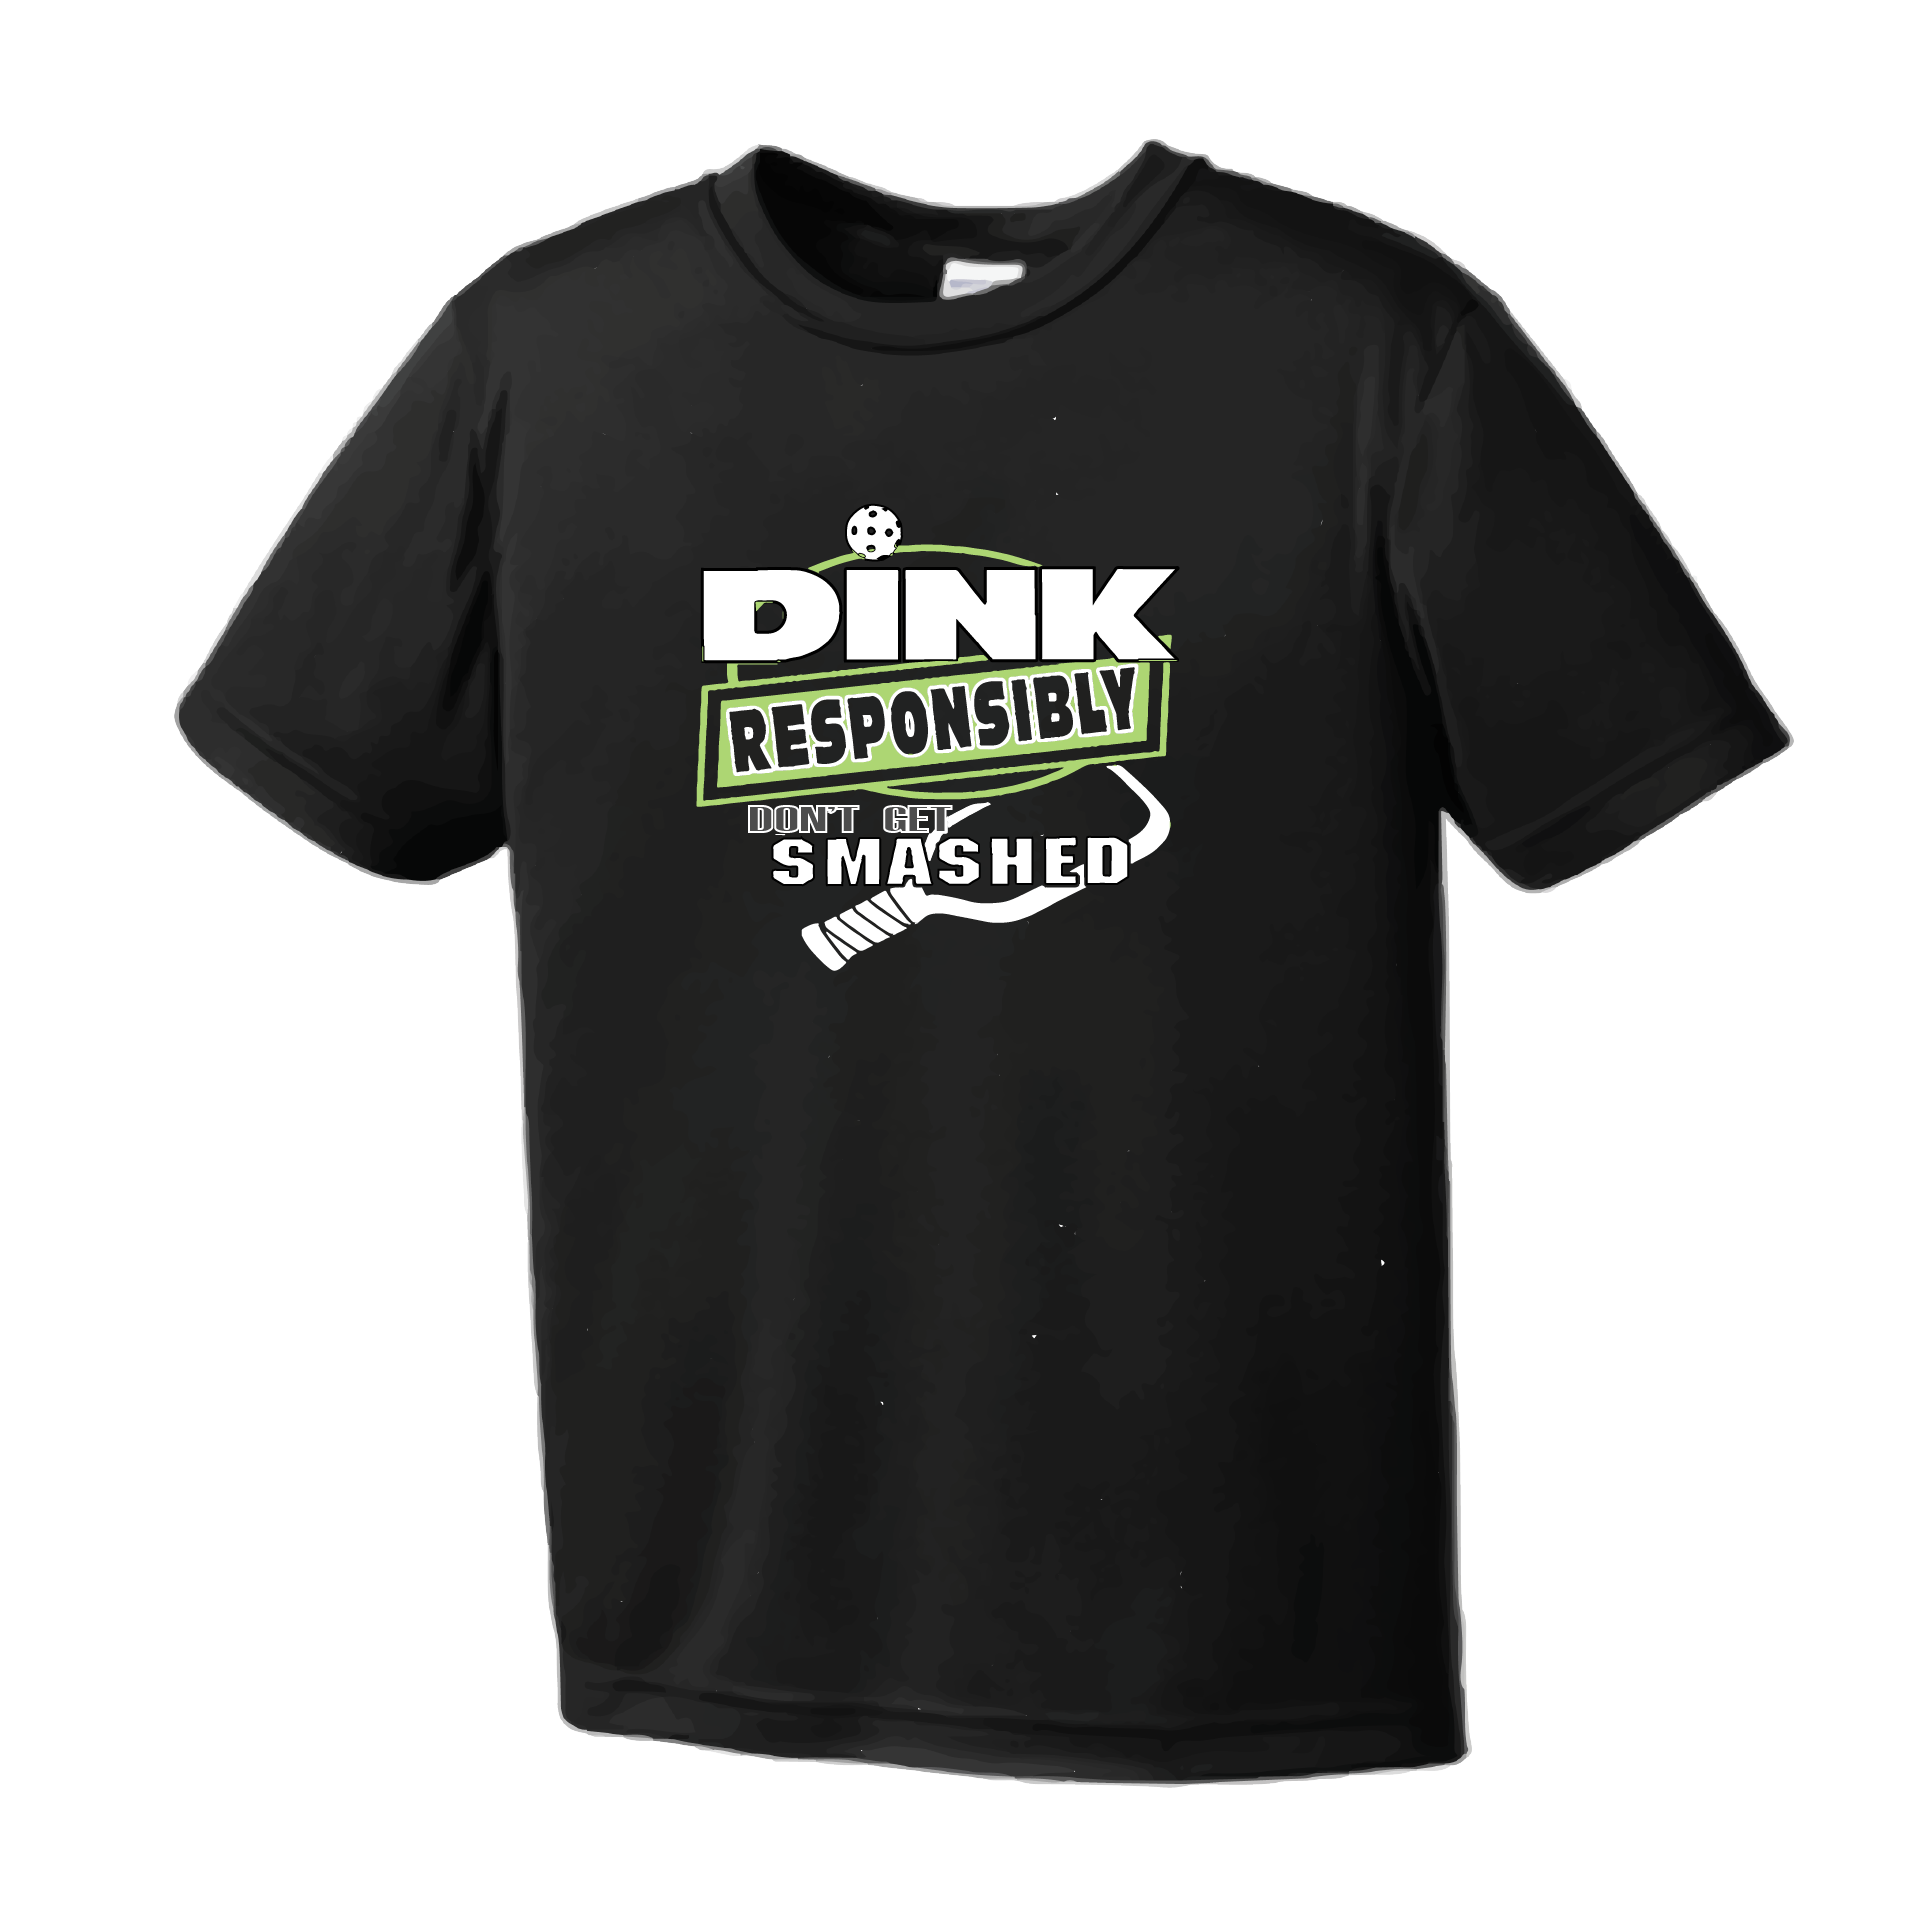 Pickleball Design: Dink Responsibly - Don't Get Smashed  Youth Style: Short Sleeve  Shirts are lightweight, roomy and highly breathable. These moisture-wicking shirts are designed for athletic performance. They feature PosiCharge technology to lock in color and prevent logos from fading. Removable tag and set-in sleeves for comfort.